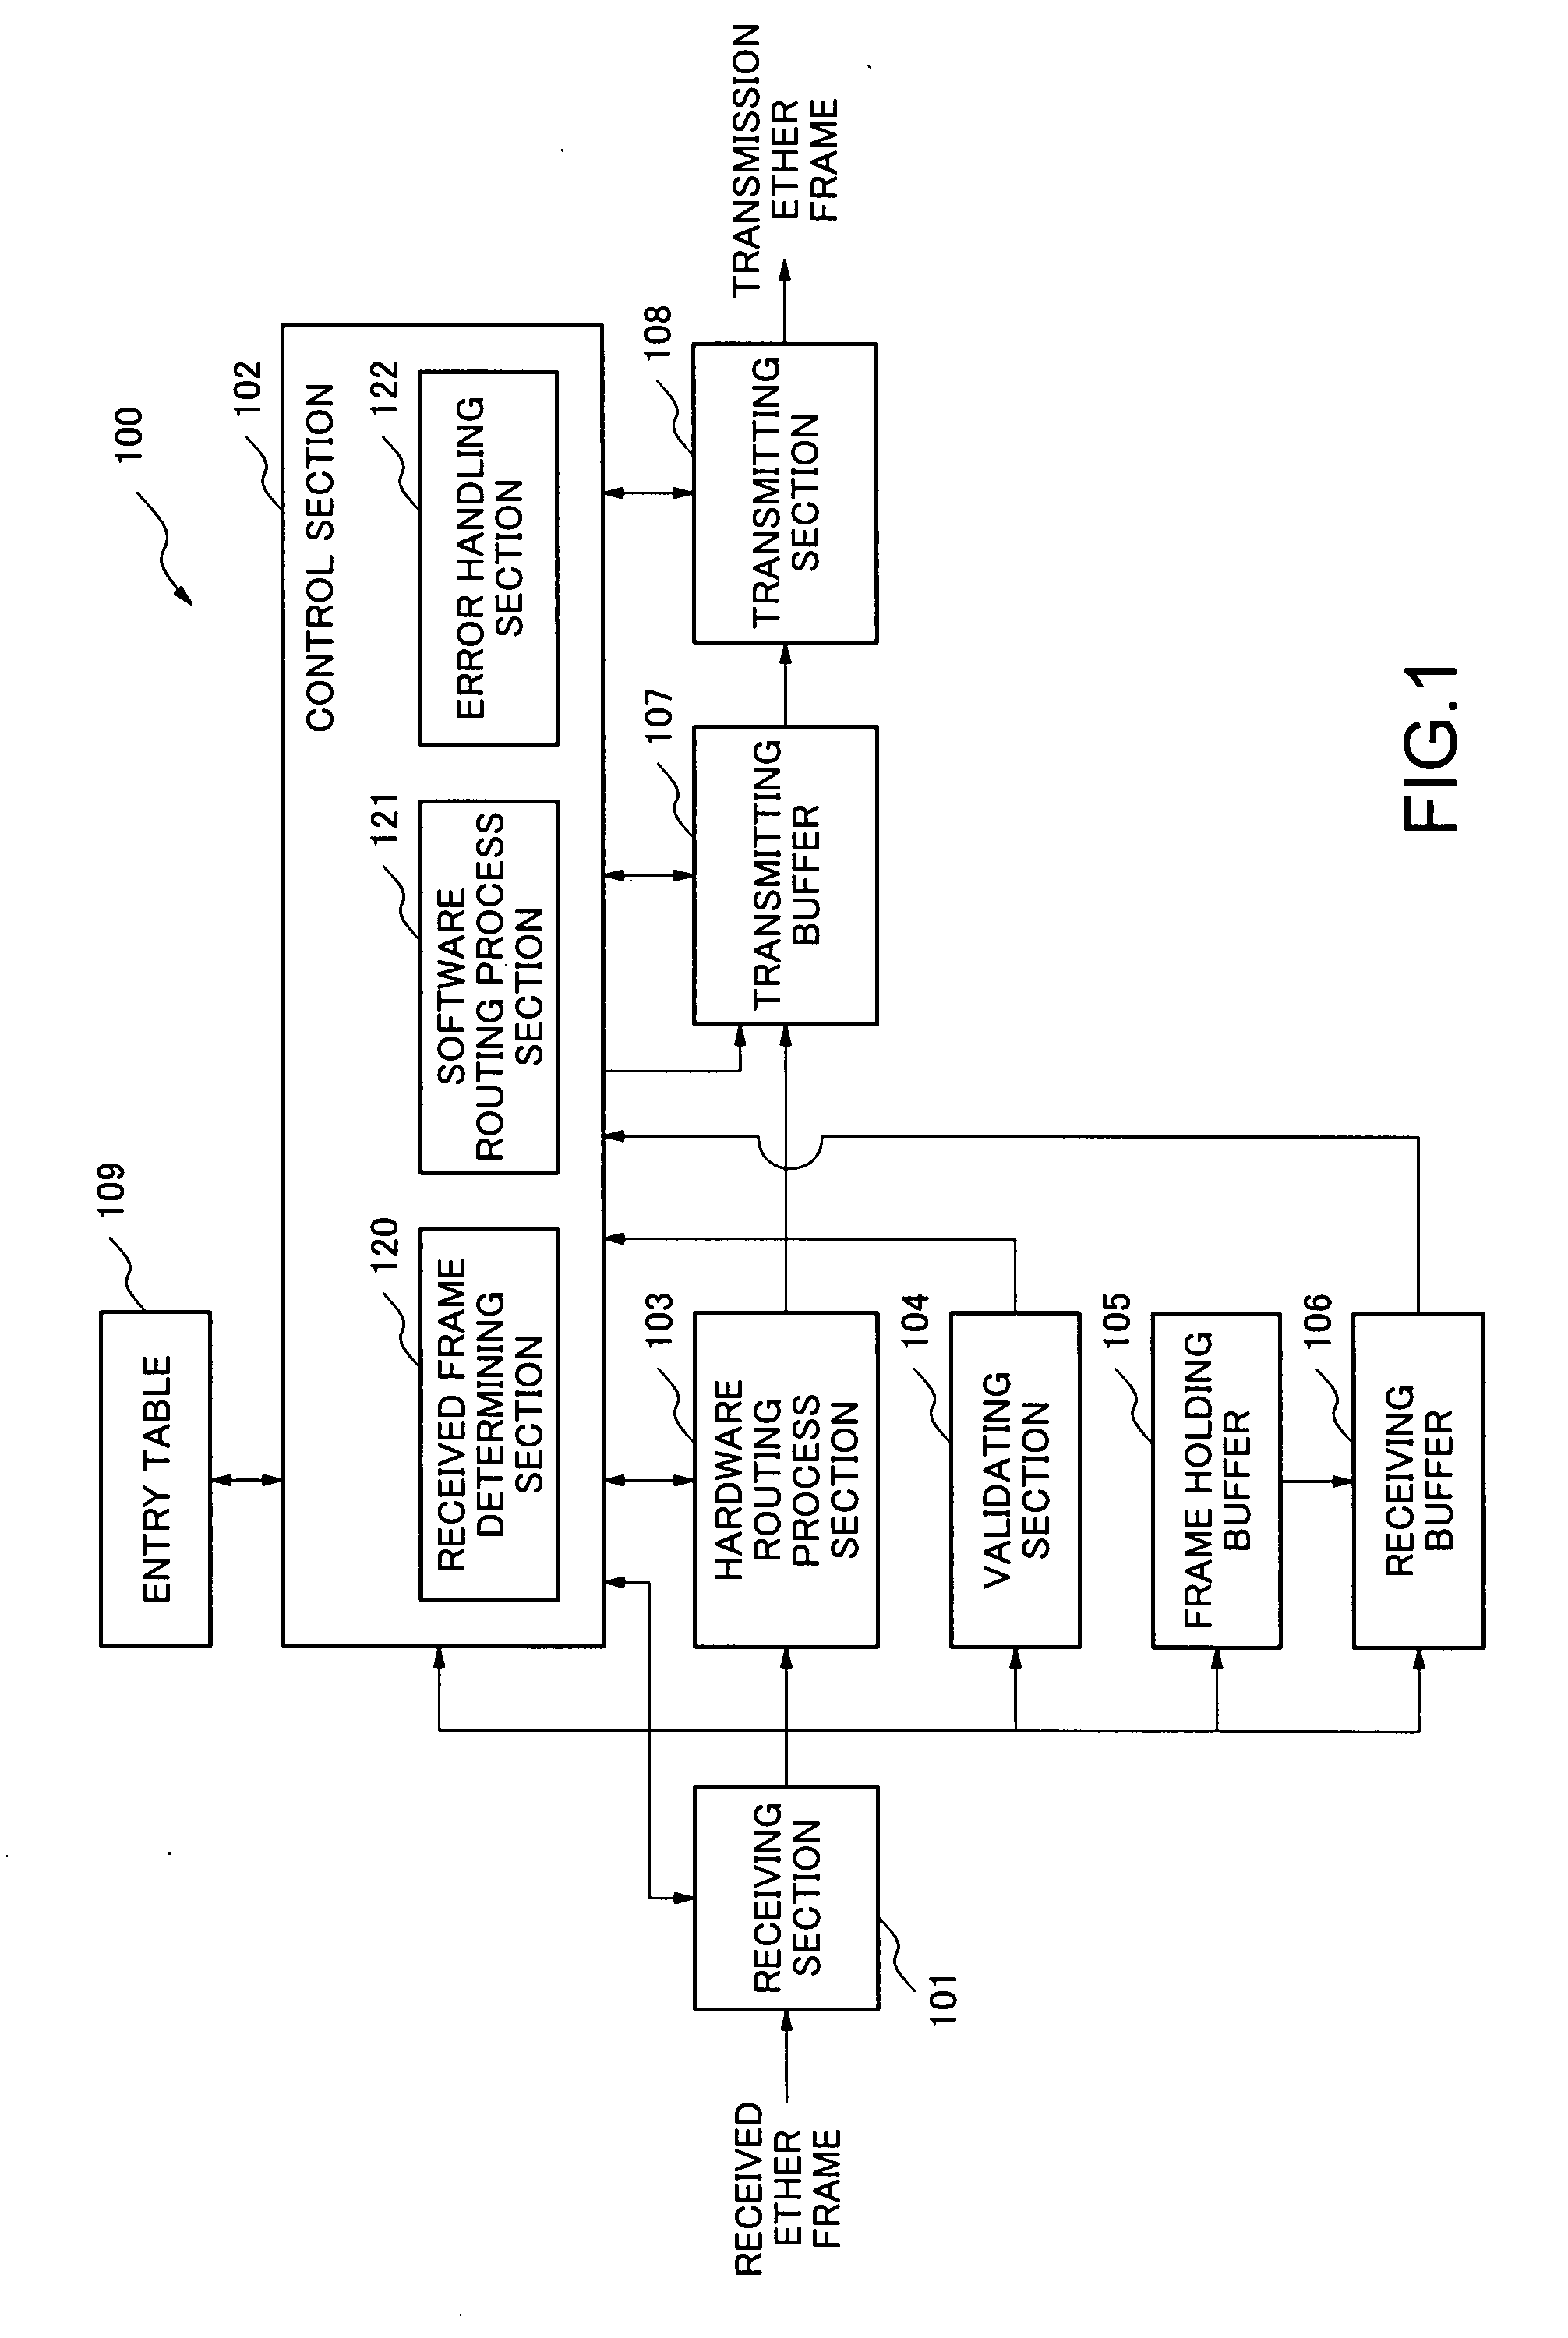 Routing apparatus and method